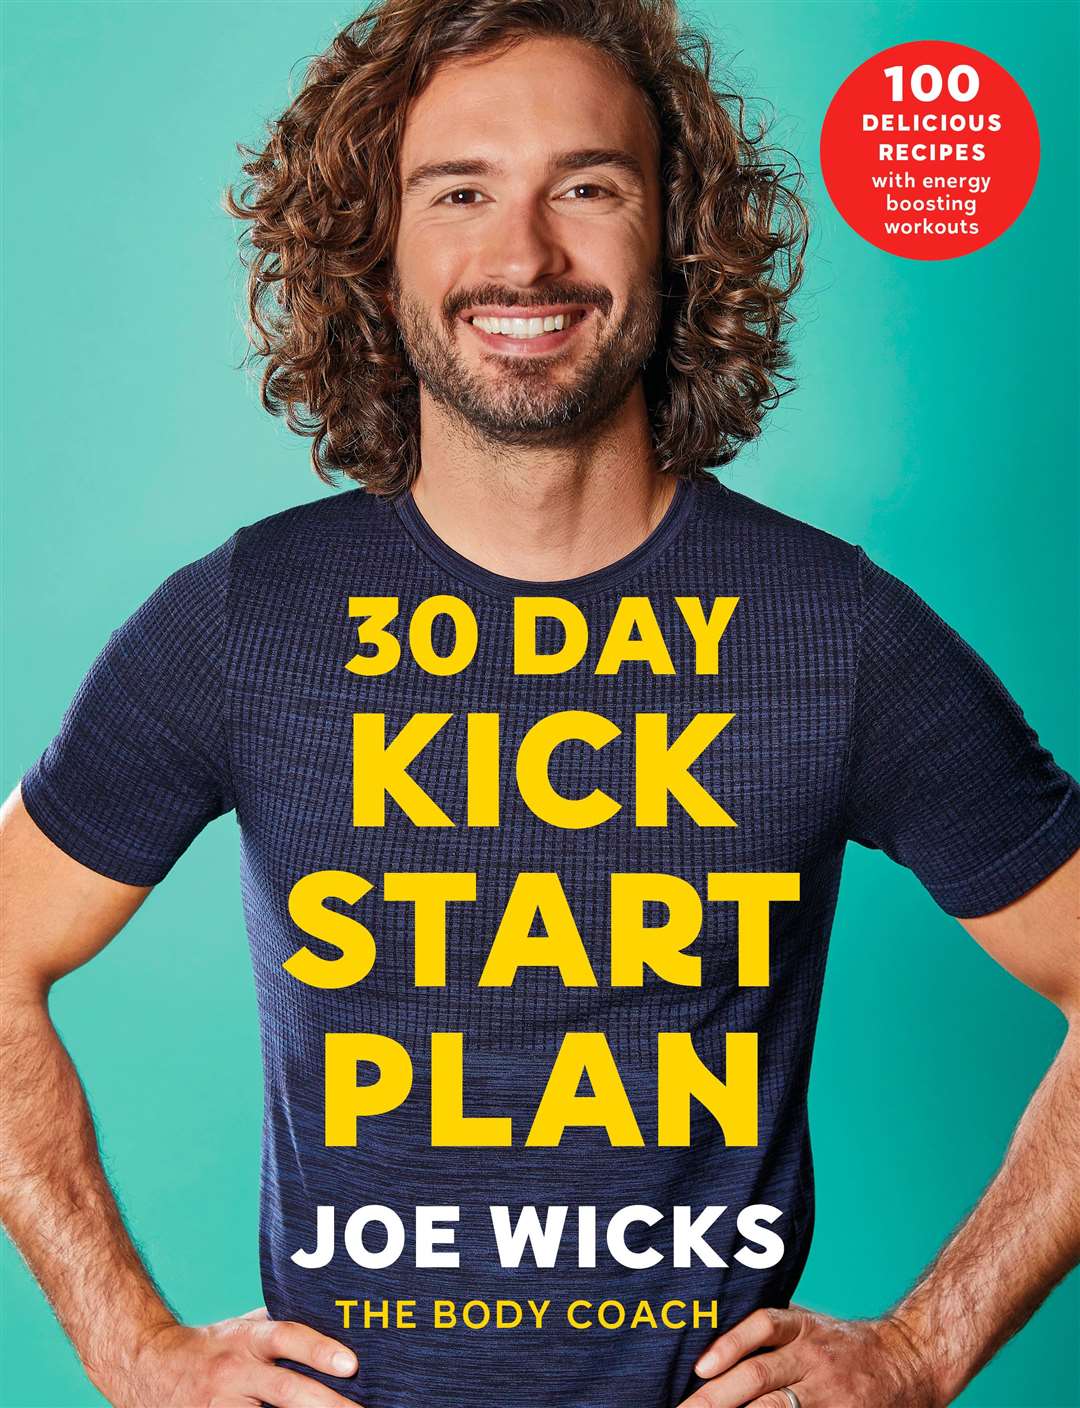 30 Day Kick Start Plan: 100 Delicious Recipes With Energy Boosting Workouts by Joe Wicks (Bluebird, £18.99). Picture: PA Photo/Andrew Burton